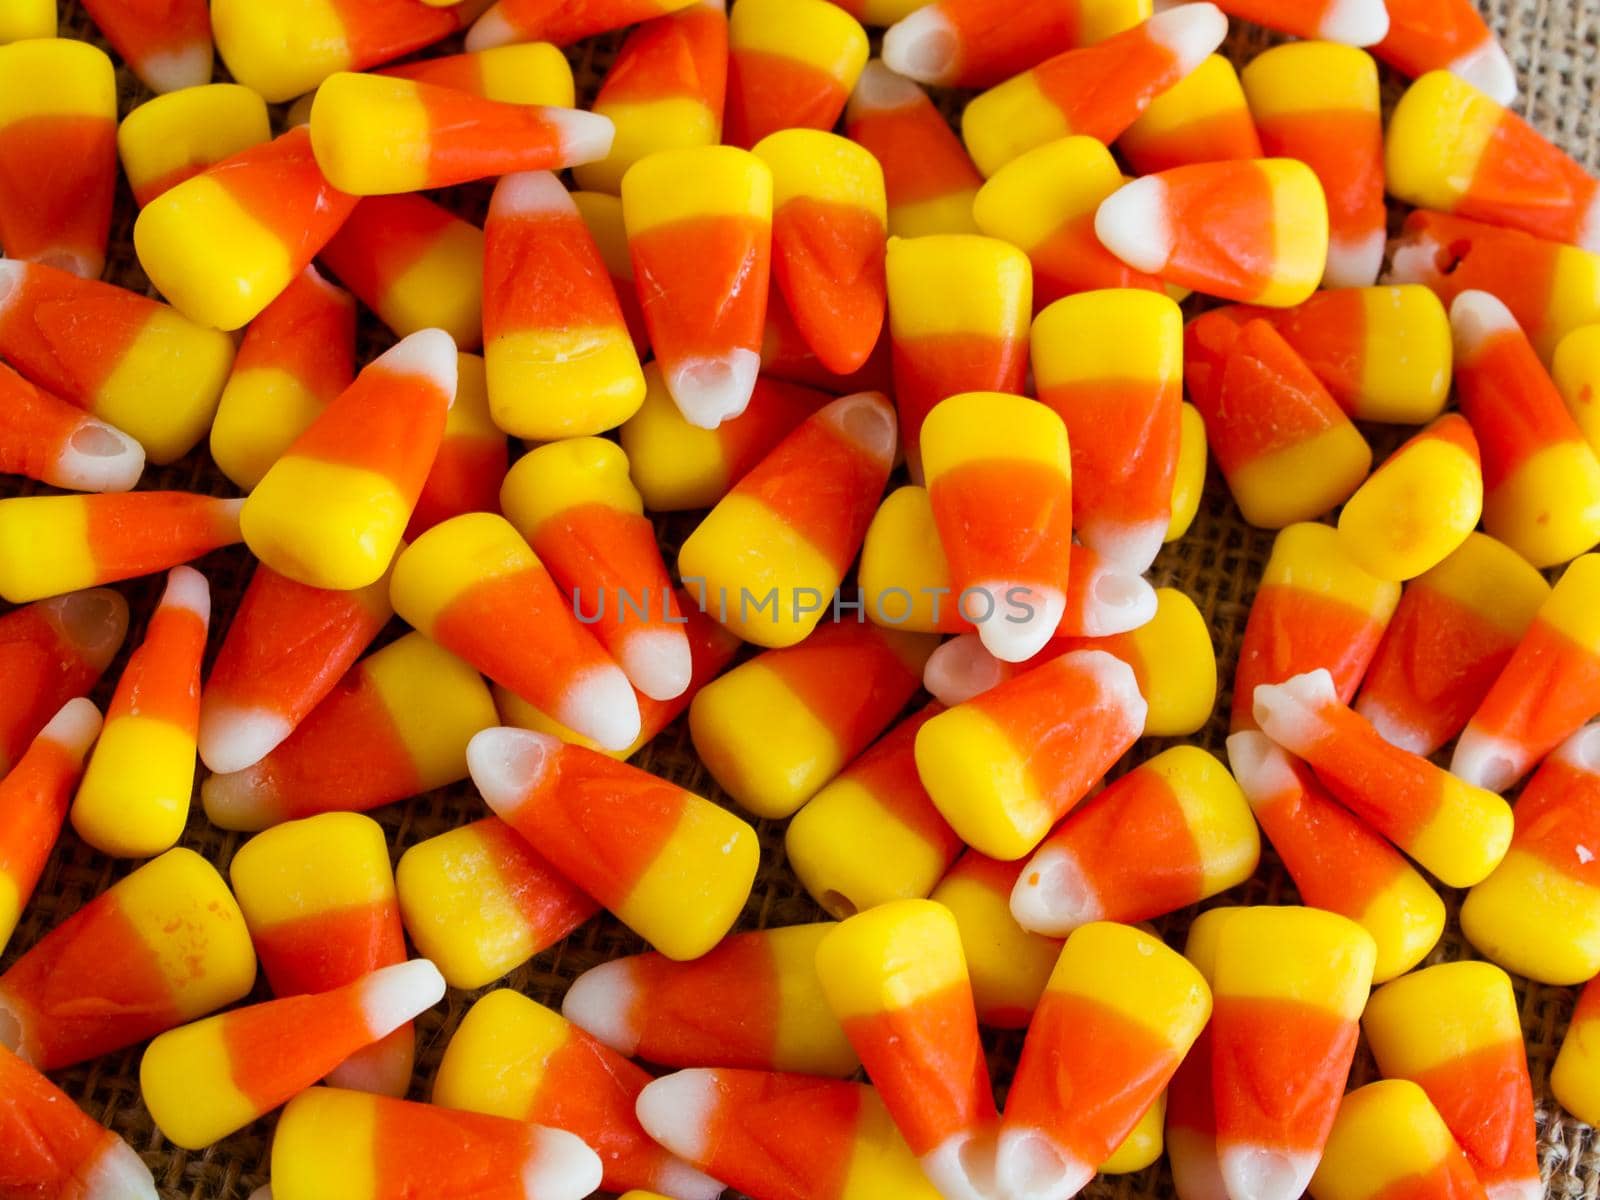 Traditional Halloween candies candy corn on burlap fabric.